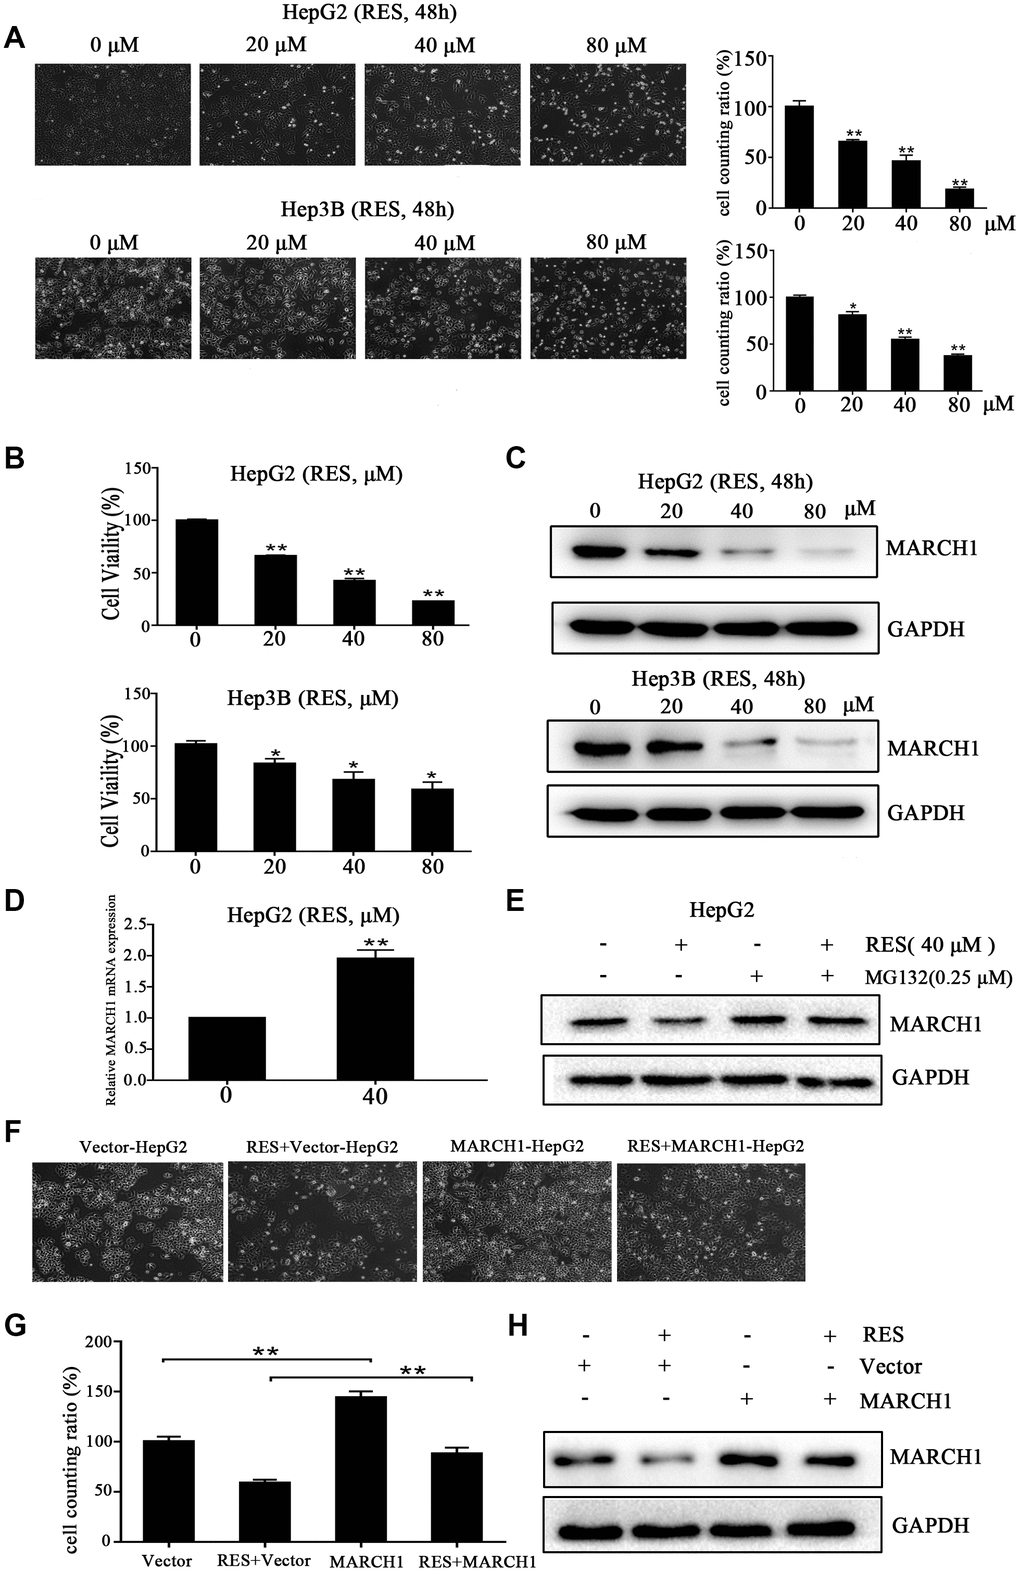 Resveratrol inhibits HCC cell viability. (A) Representative images of HepG2 and Hep3B cells treated with different concentrations of resveratrol for 48 h. (B) The cytotoxicity of HepG2 and Hep3B cells treated with resveratrol was estimated by CCK-8 assays. HepG2 and Hep3B cells were treated with different concentrations of resveratrol for 48 h. The absorbance at 450 nm is detected. (C) Western blot analysis showed that MARCH1 expression decreased after resveratrol treated for 48 h in both HepG2 and Hep3B cells. GAPDH was also detected as the loading control. (D) HepG2 cells were treated with the indicated dose of resveratrol for 24h and then analyzed the transcription level of MARCH1. MARCH1 mRNA levels were normalized to GAPDH. (E) HepG2 cells were pretreated with 0.25μM MG132 for 24h, then analyzed the expression of MARCH1. (F, G) HepG2 cells were treated with the indicated dose of empty vectors and overexpression plasmids for 48h, then incubation with resveratrol for 24h. (H) The expression of MARCH1 were detected. All values represent the mean ± SD. **P 